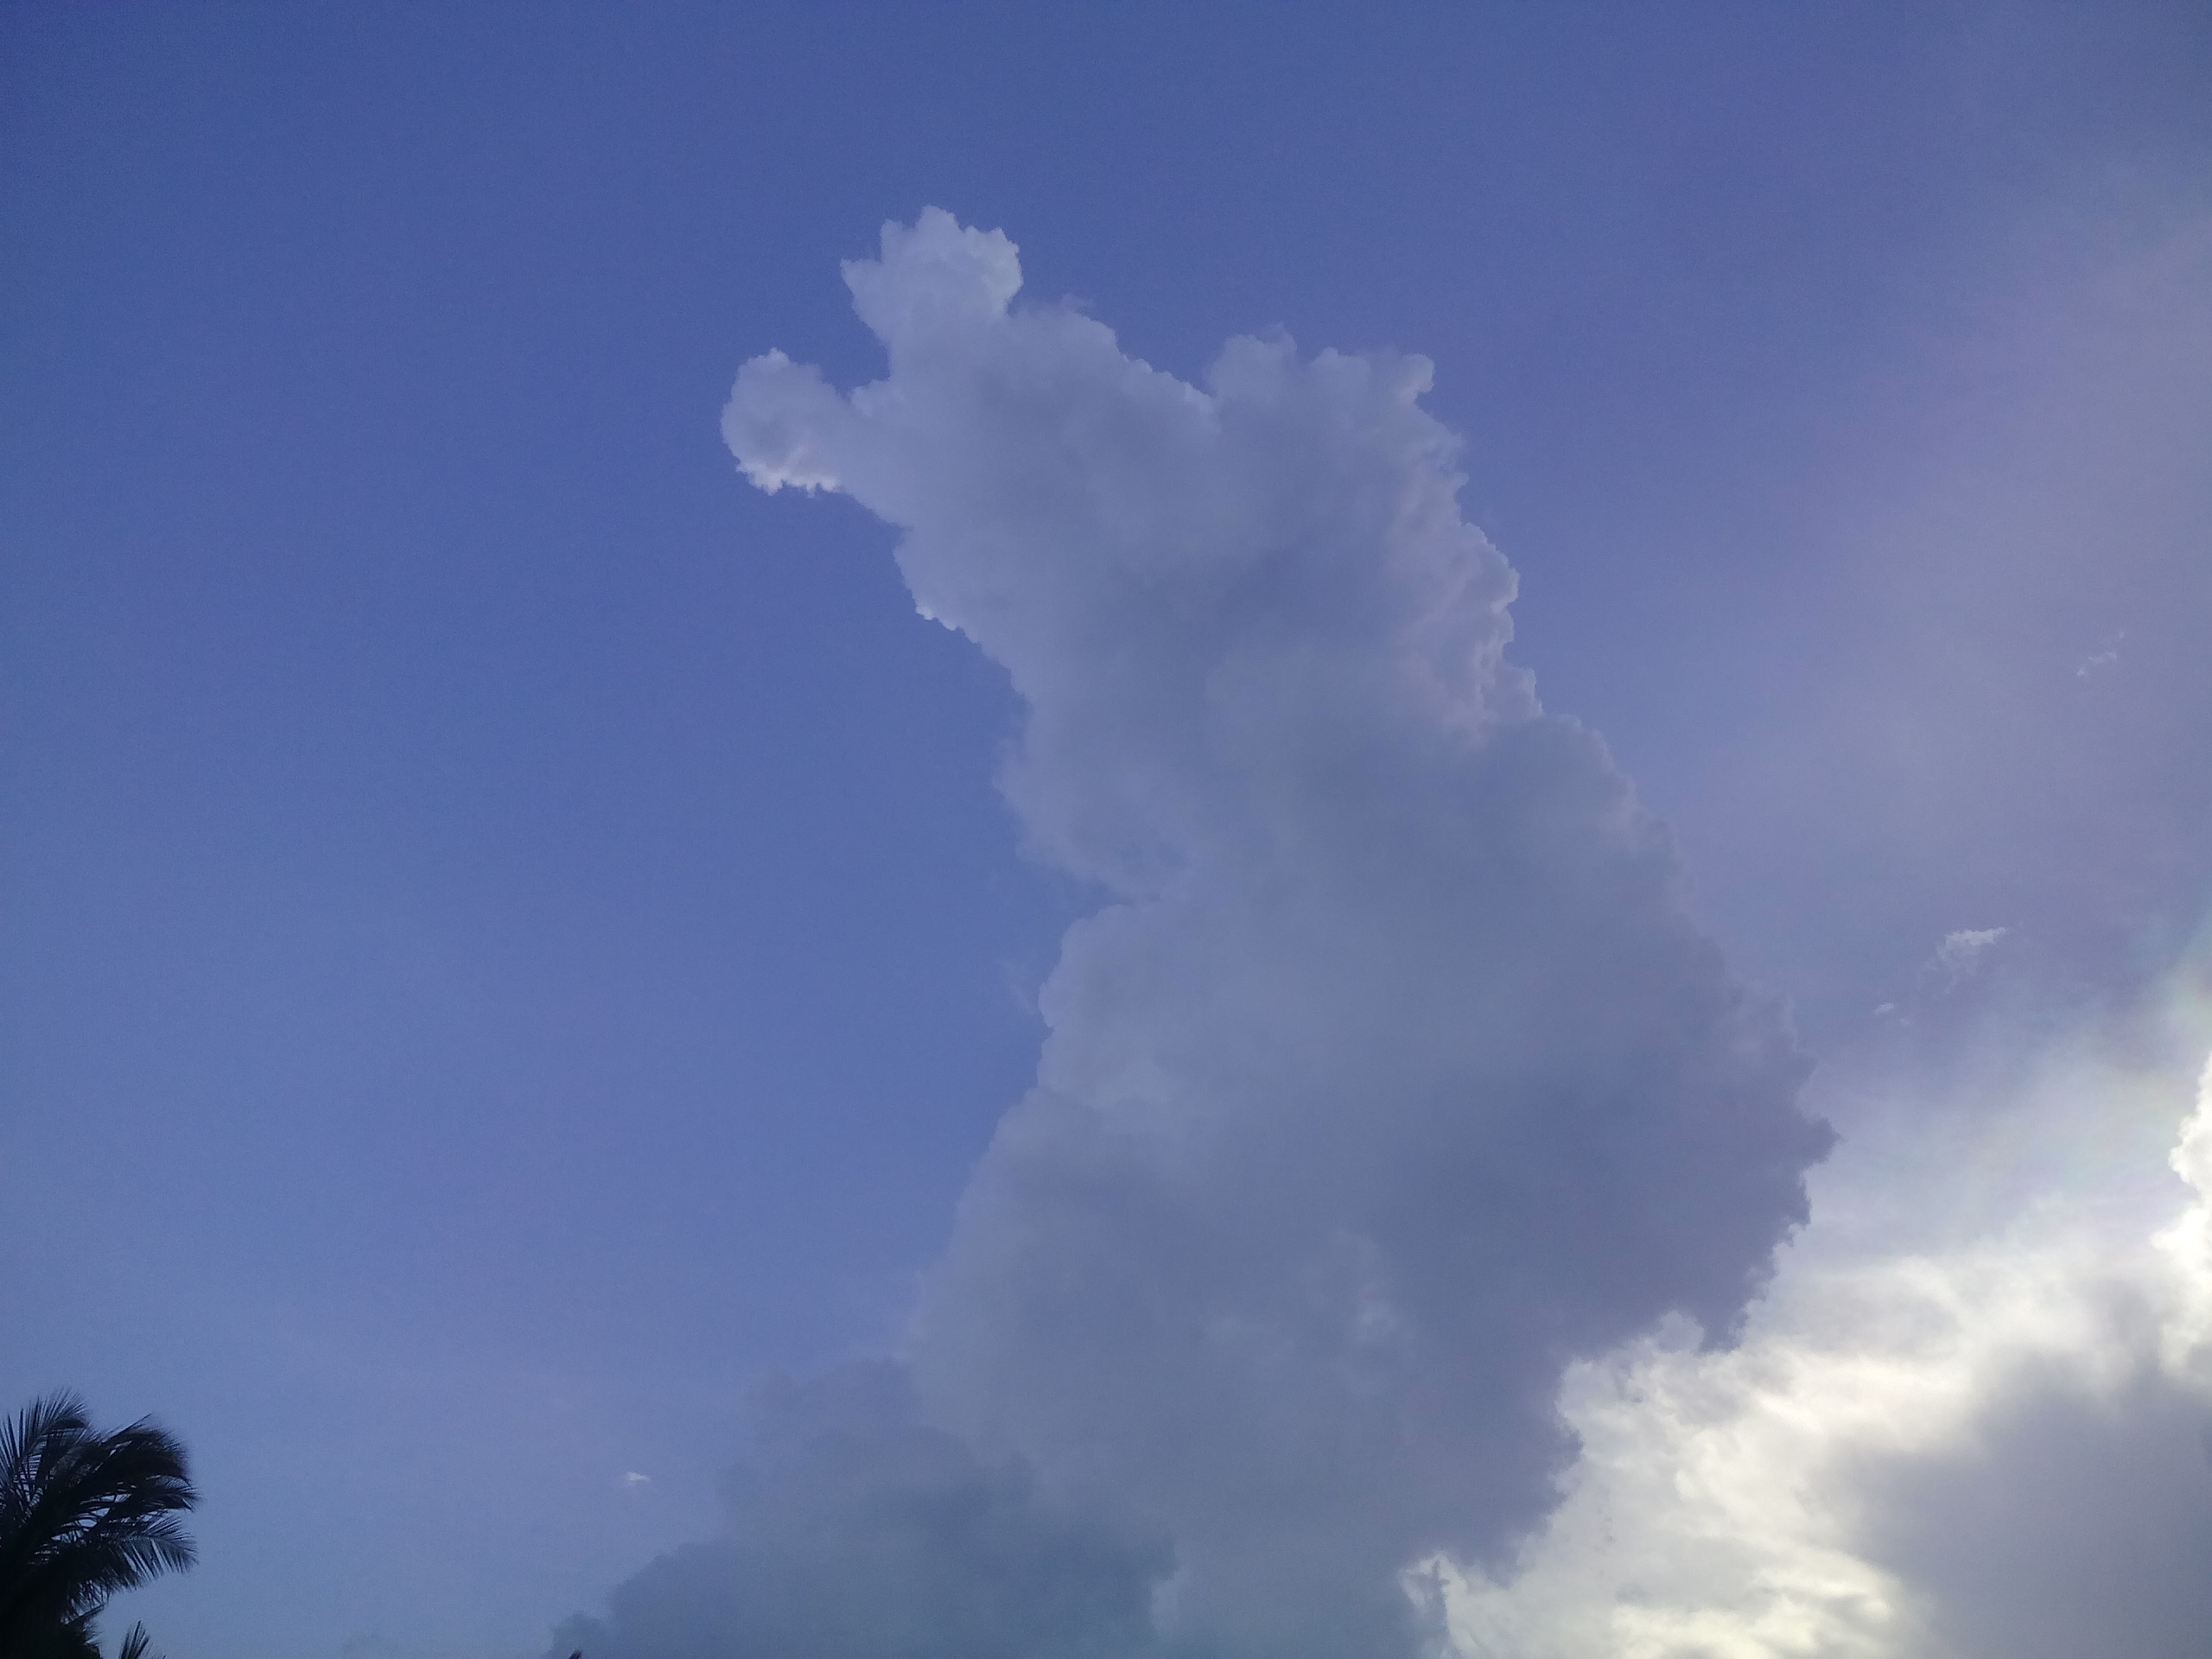 Cloud formation photo